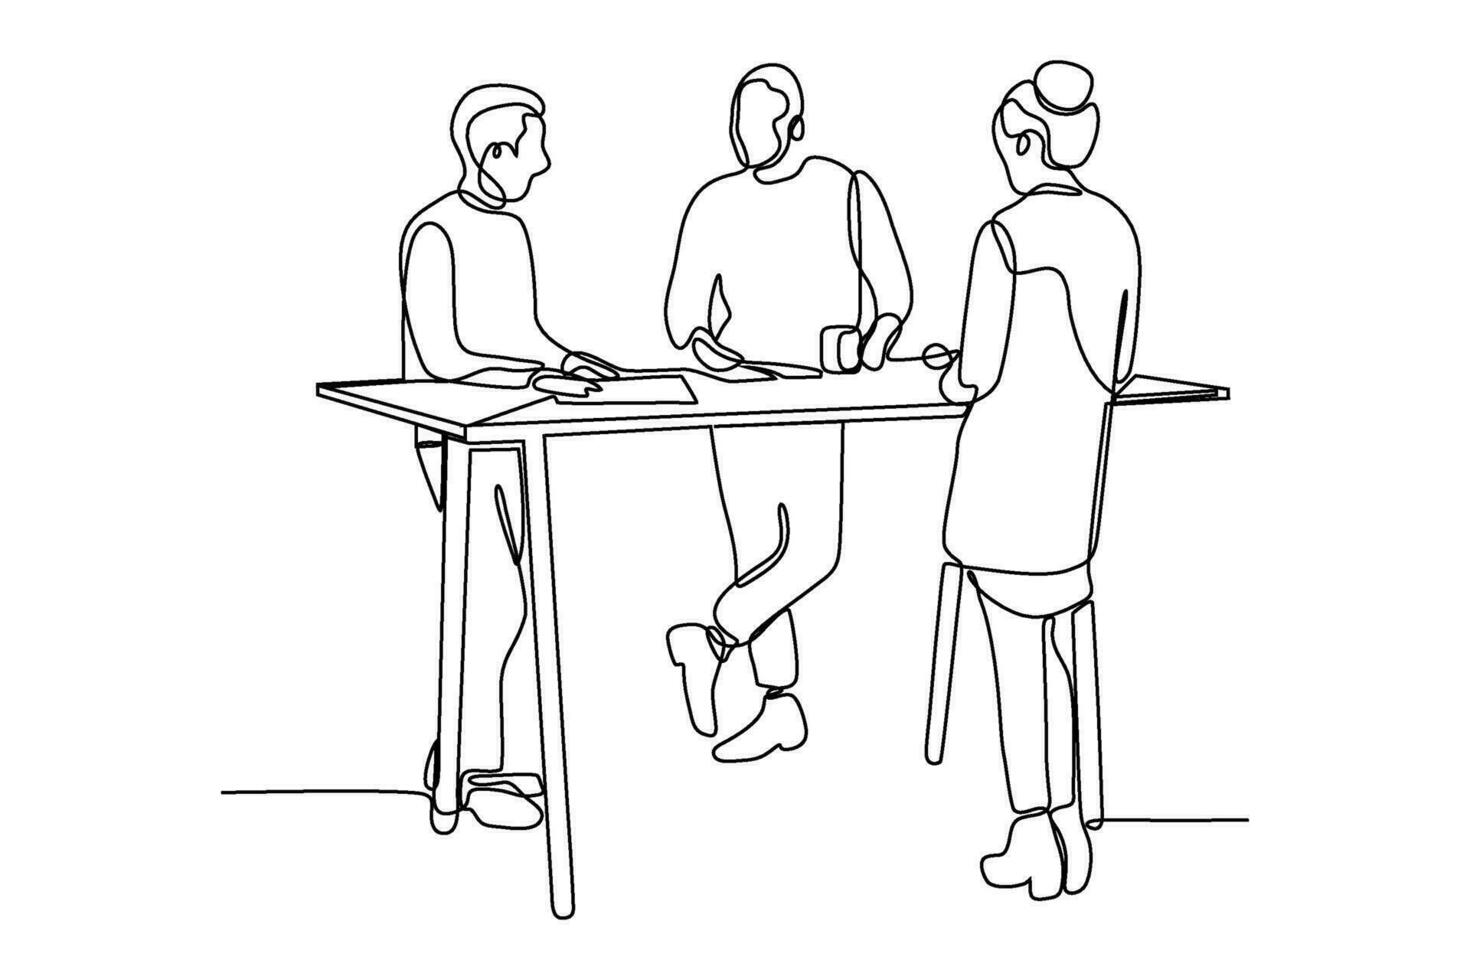 continuous line vector illustration design of people having discussion